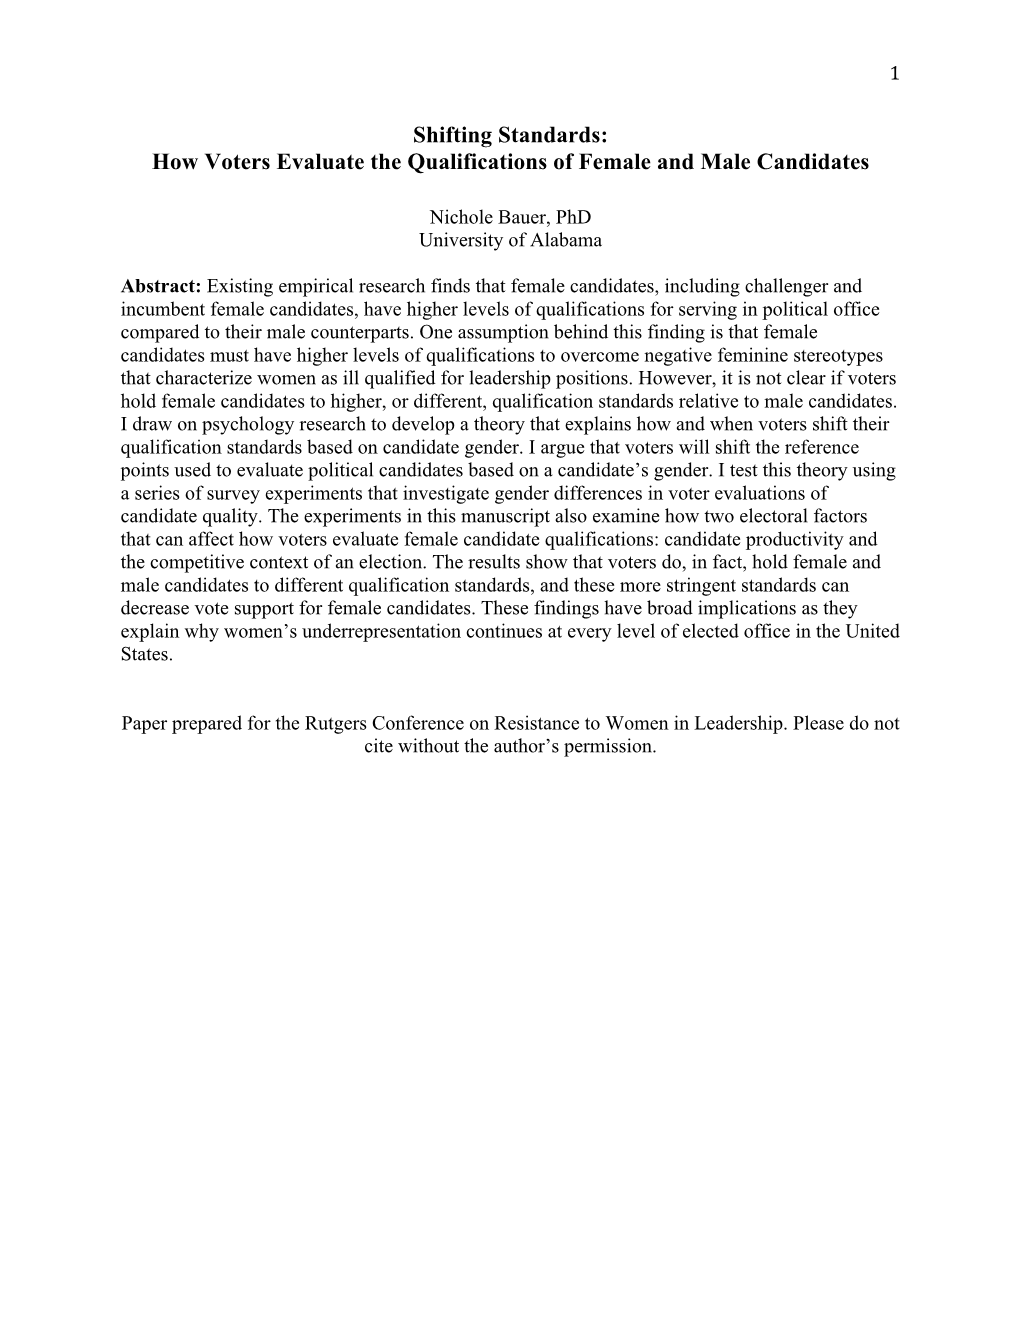 Shifting Standards: How Voters Evaluate the Qualifications of Female and Male Candidates